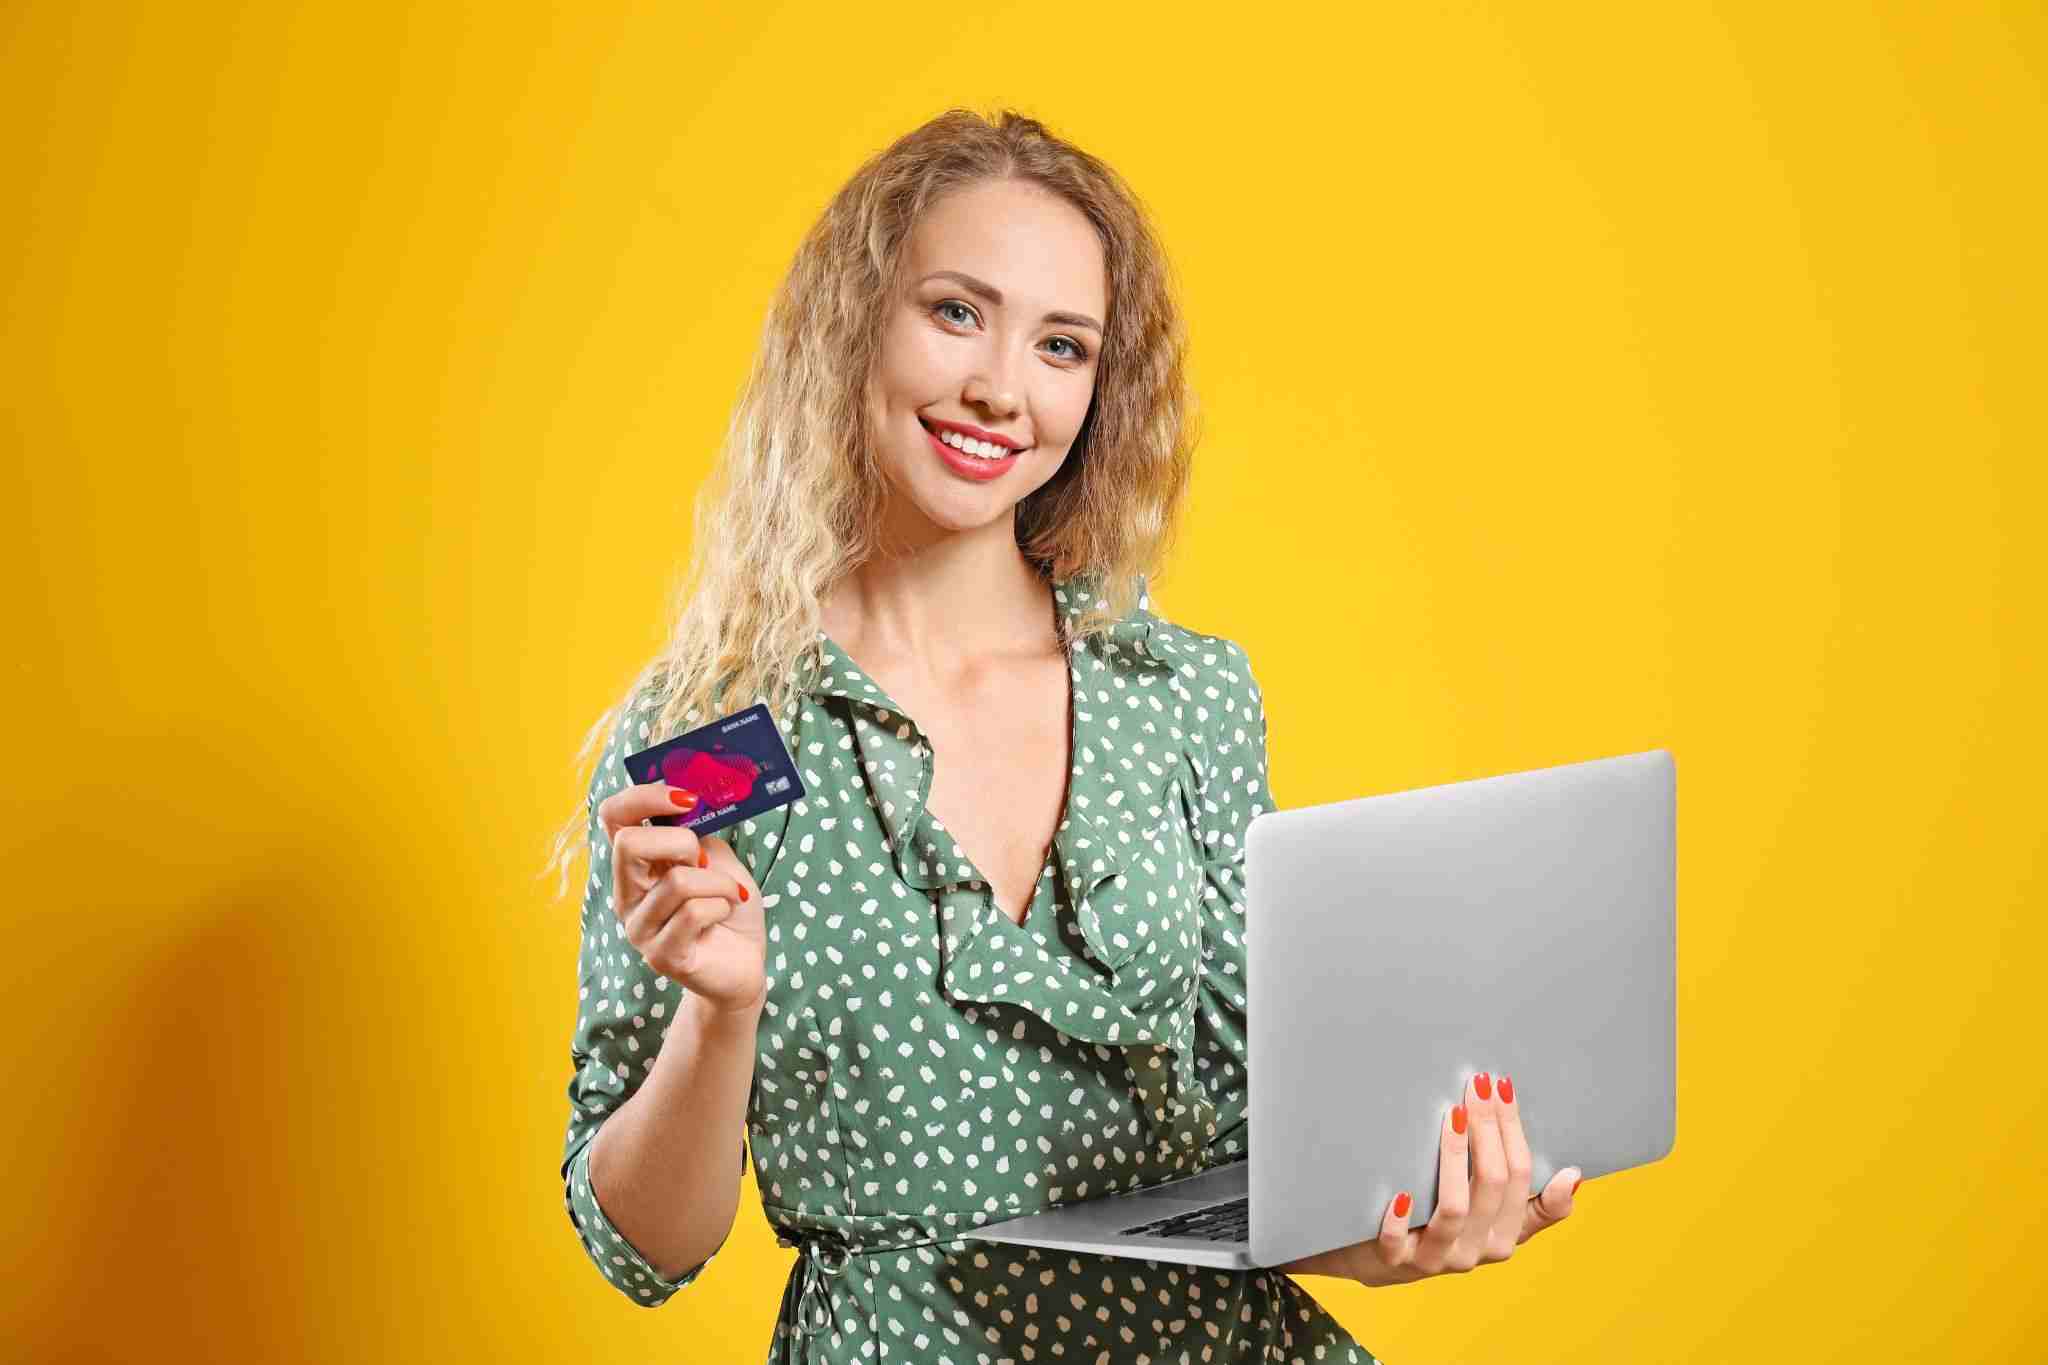 young woman holding a laptop and a credit card